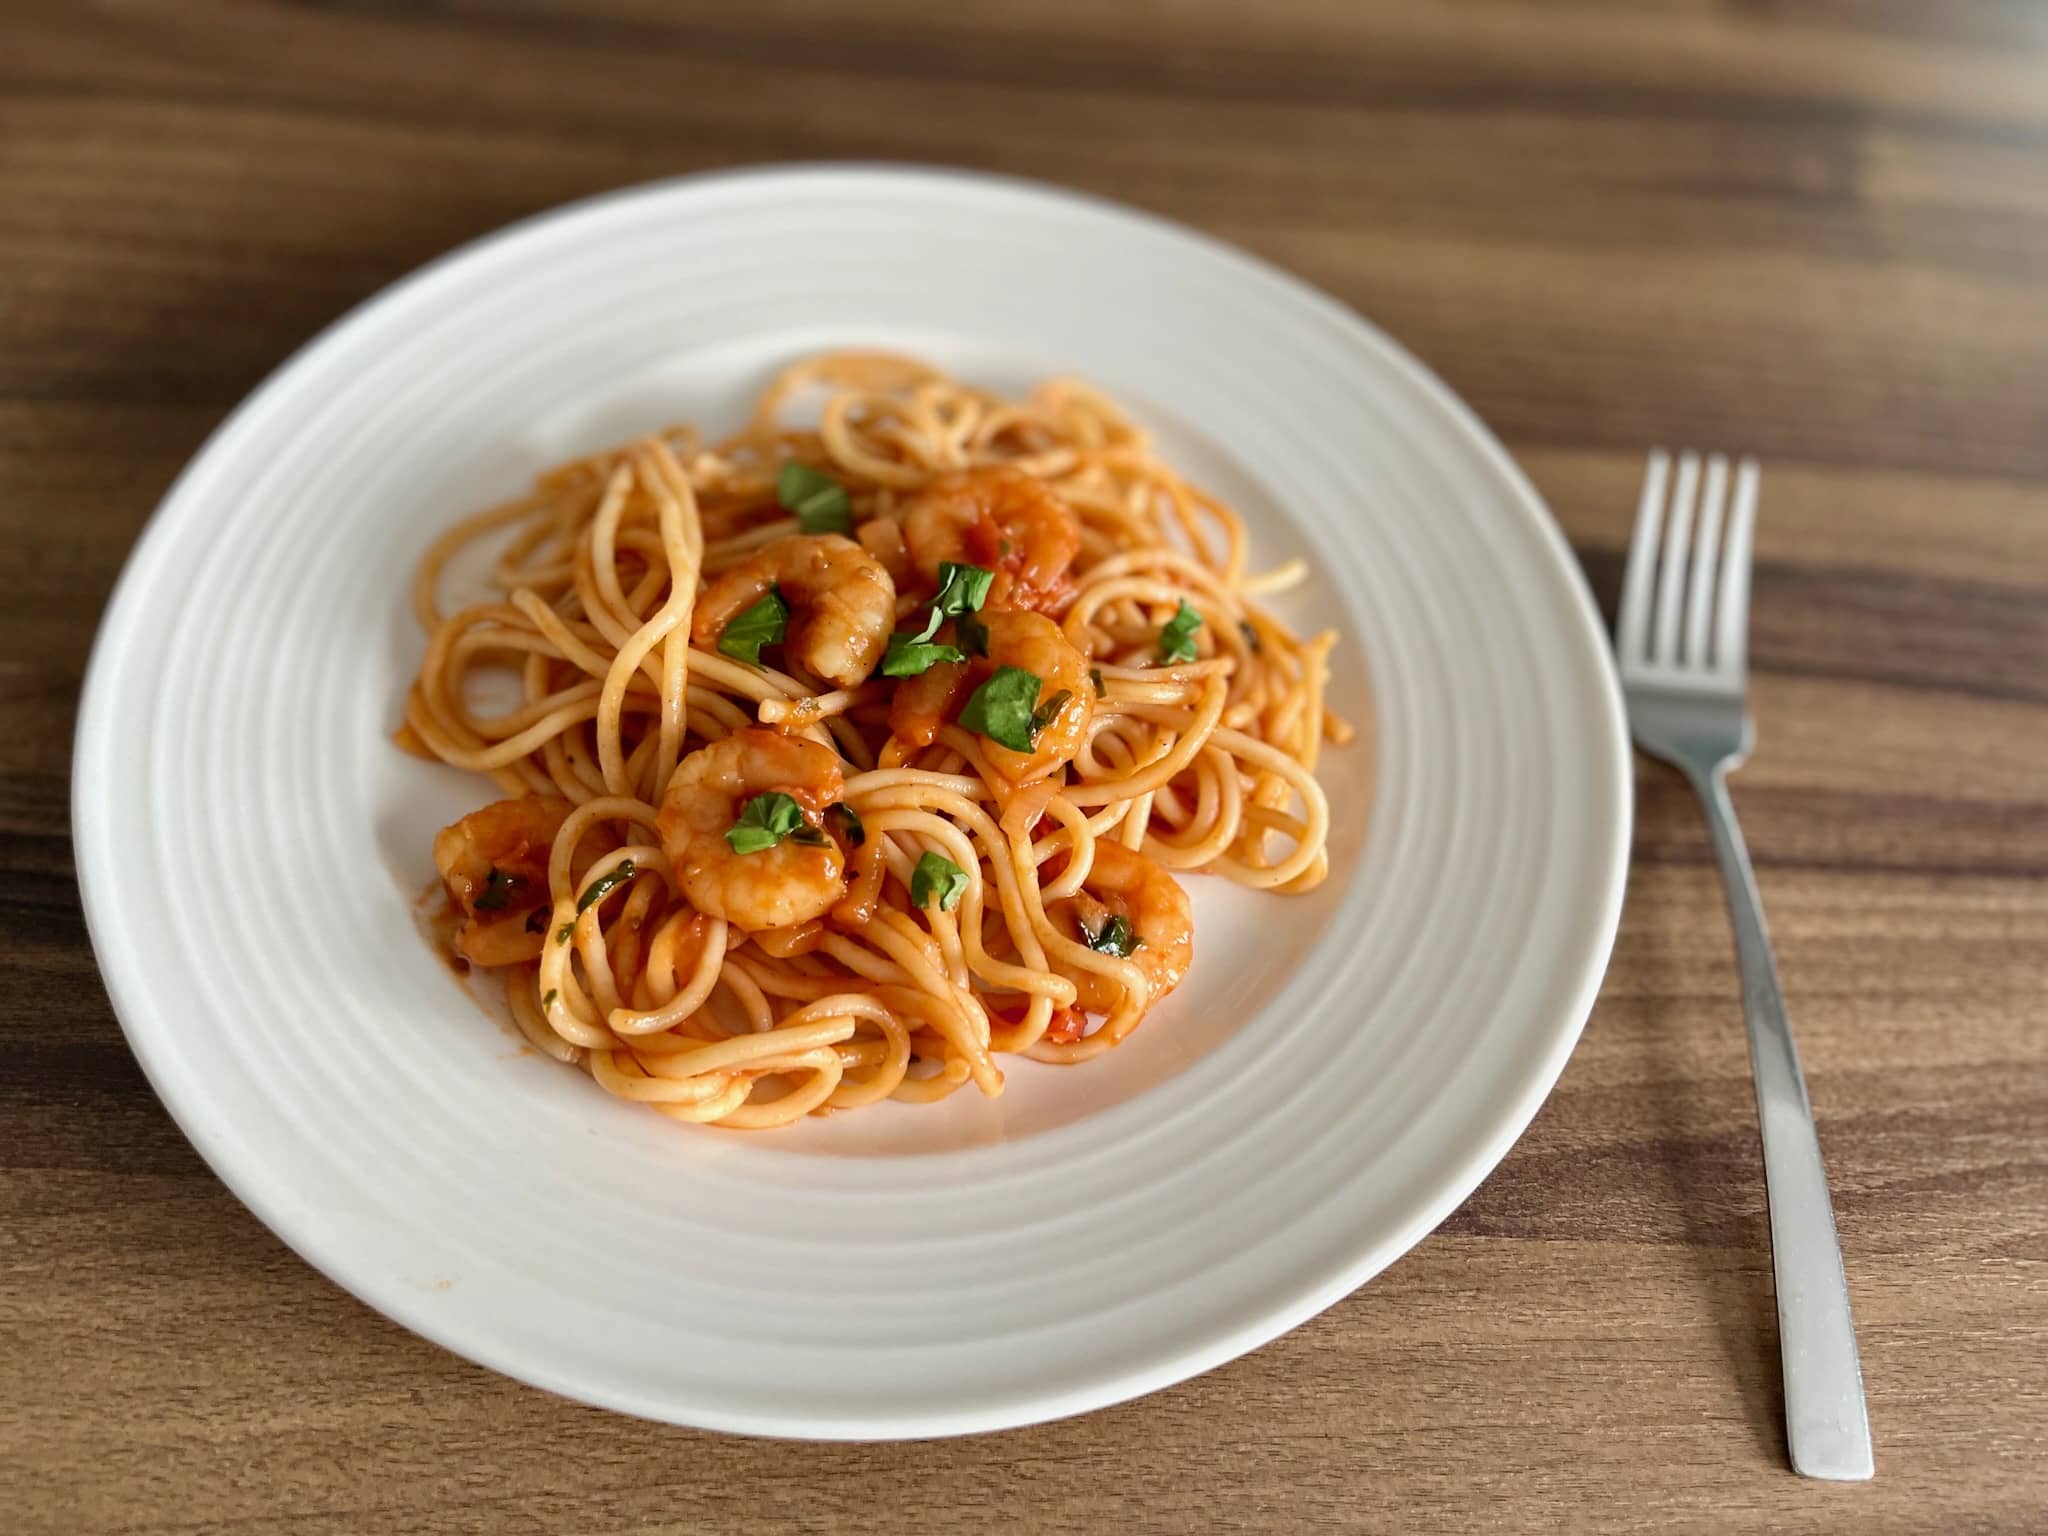 Tomato and Basil Prawns Pasta served on a plate